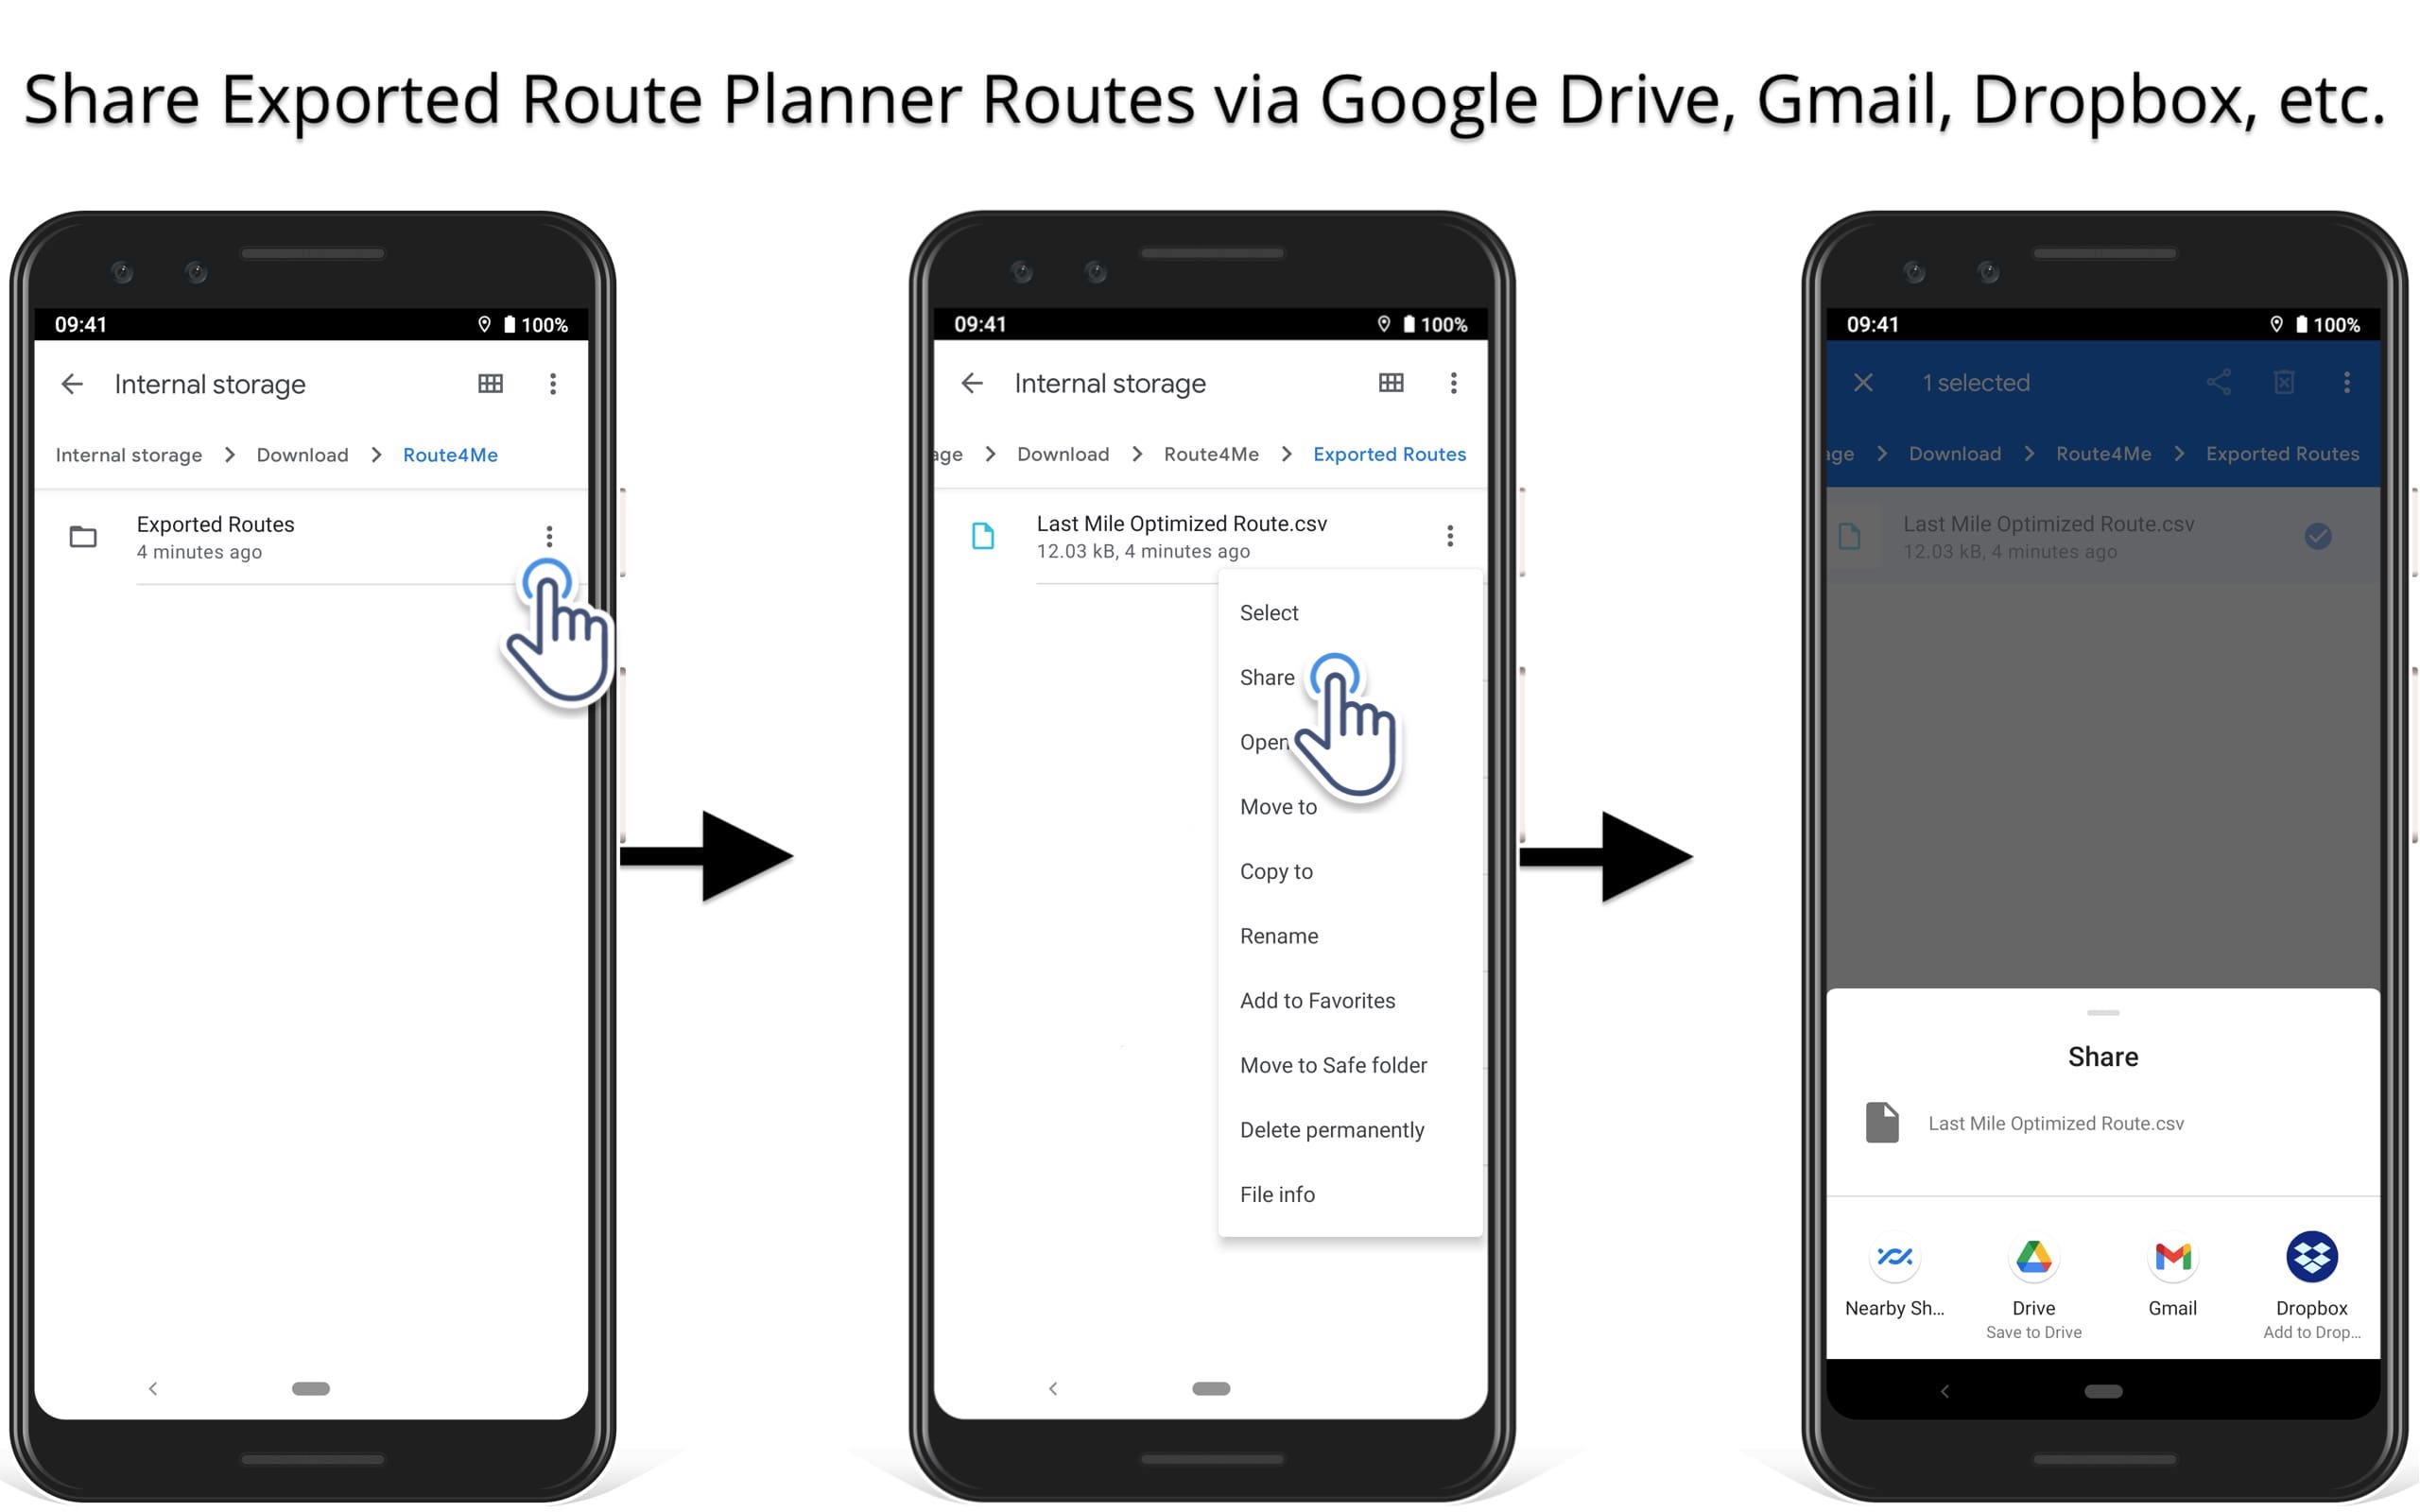 Send route planner downloaded routes via Gmail, Google Drive, Dropbox, Slack, and other apps.